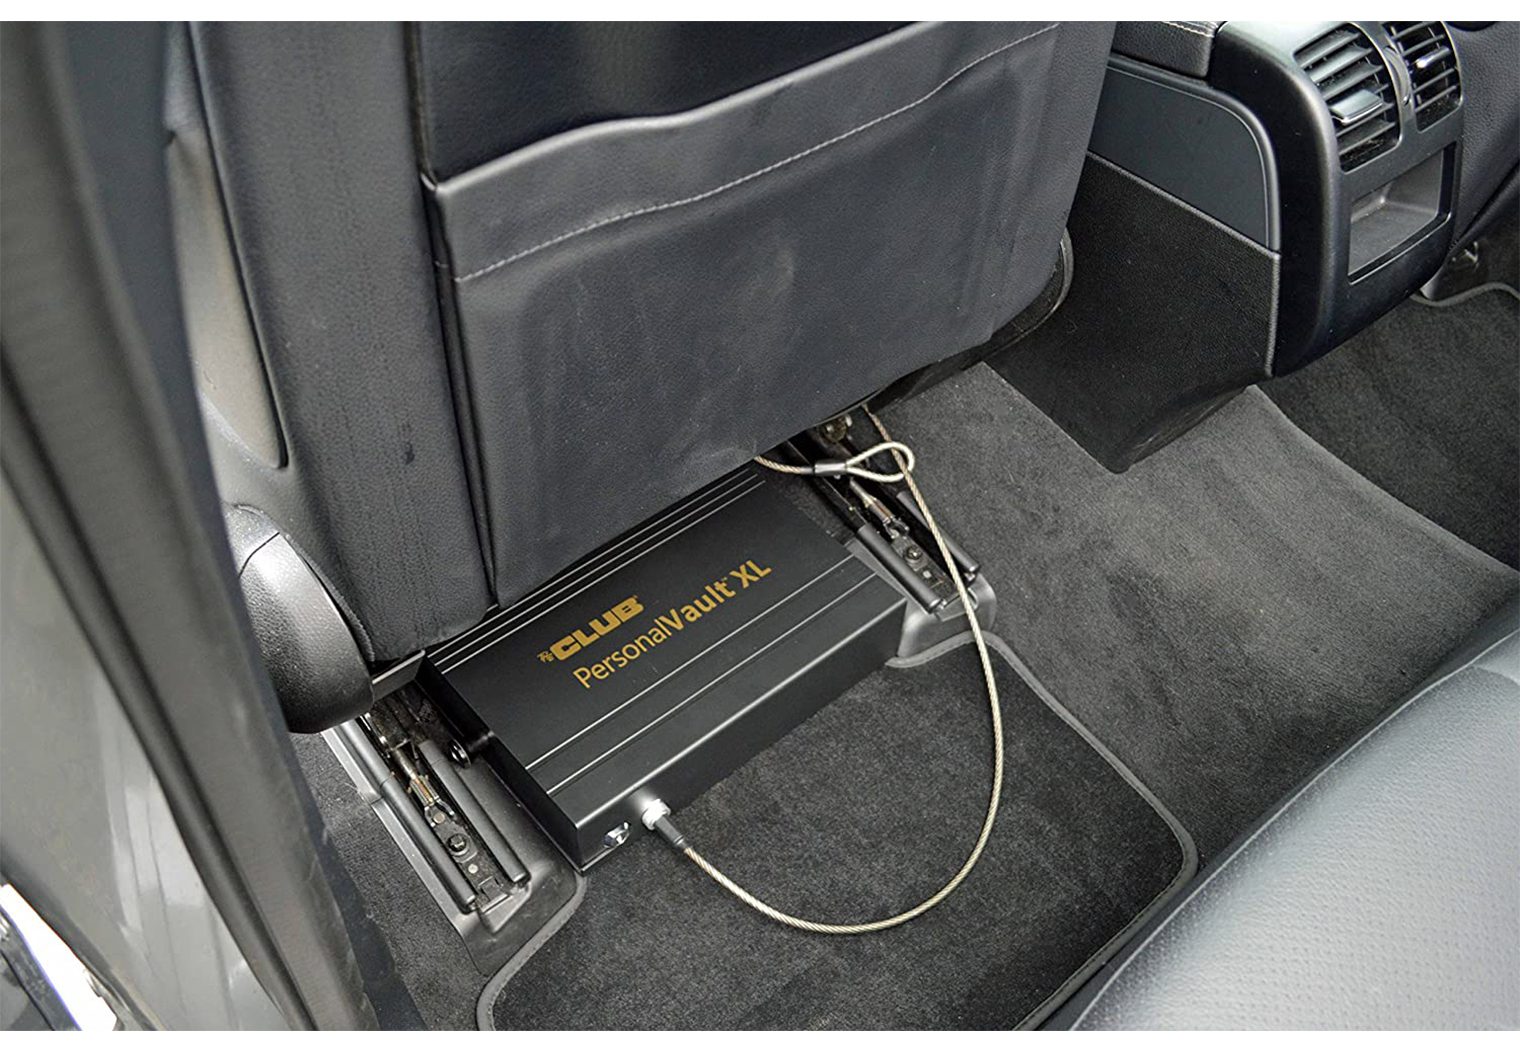 The Club Personal Vault XL under seat